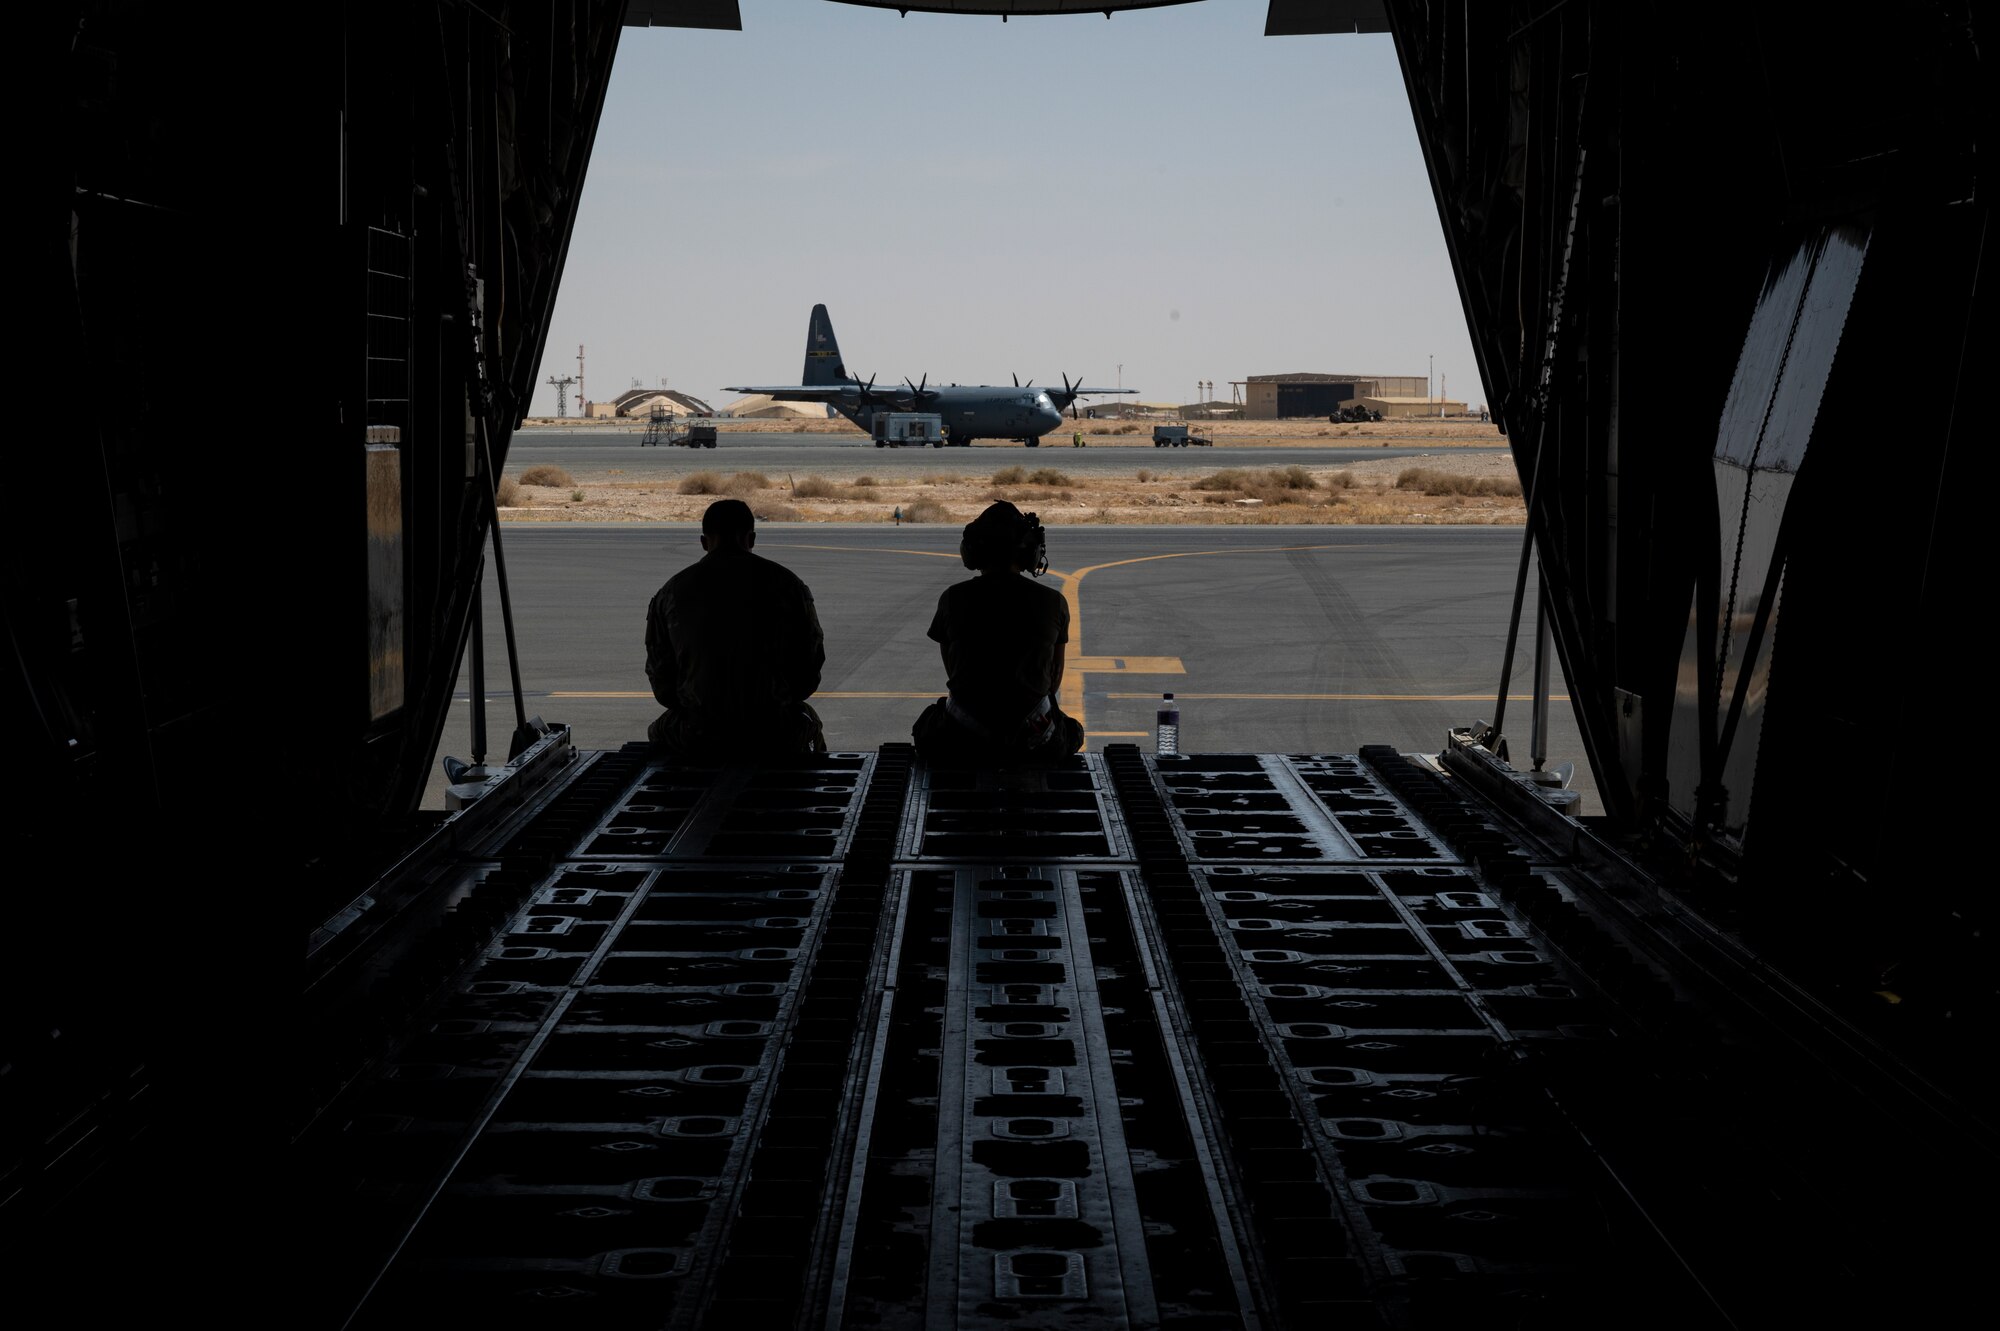 U.S. Air Force Tech. Sgt. Anthony Miller, left, and Senior Airman Carolyn Hendrix, right, 41st Expeditionary Squadron loadmasters, wait for for their mission to start on a C-130J Super Hercules